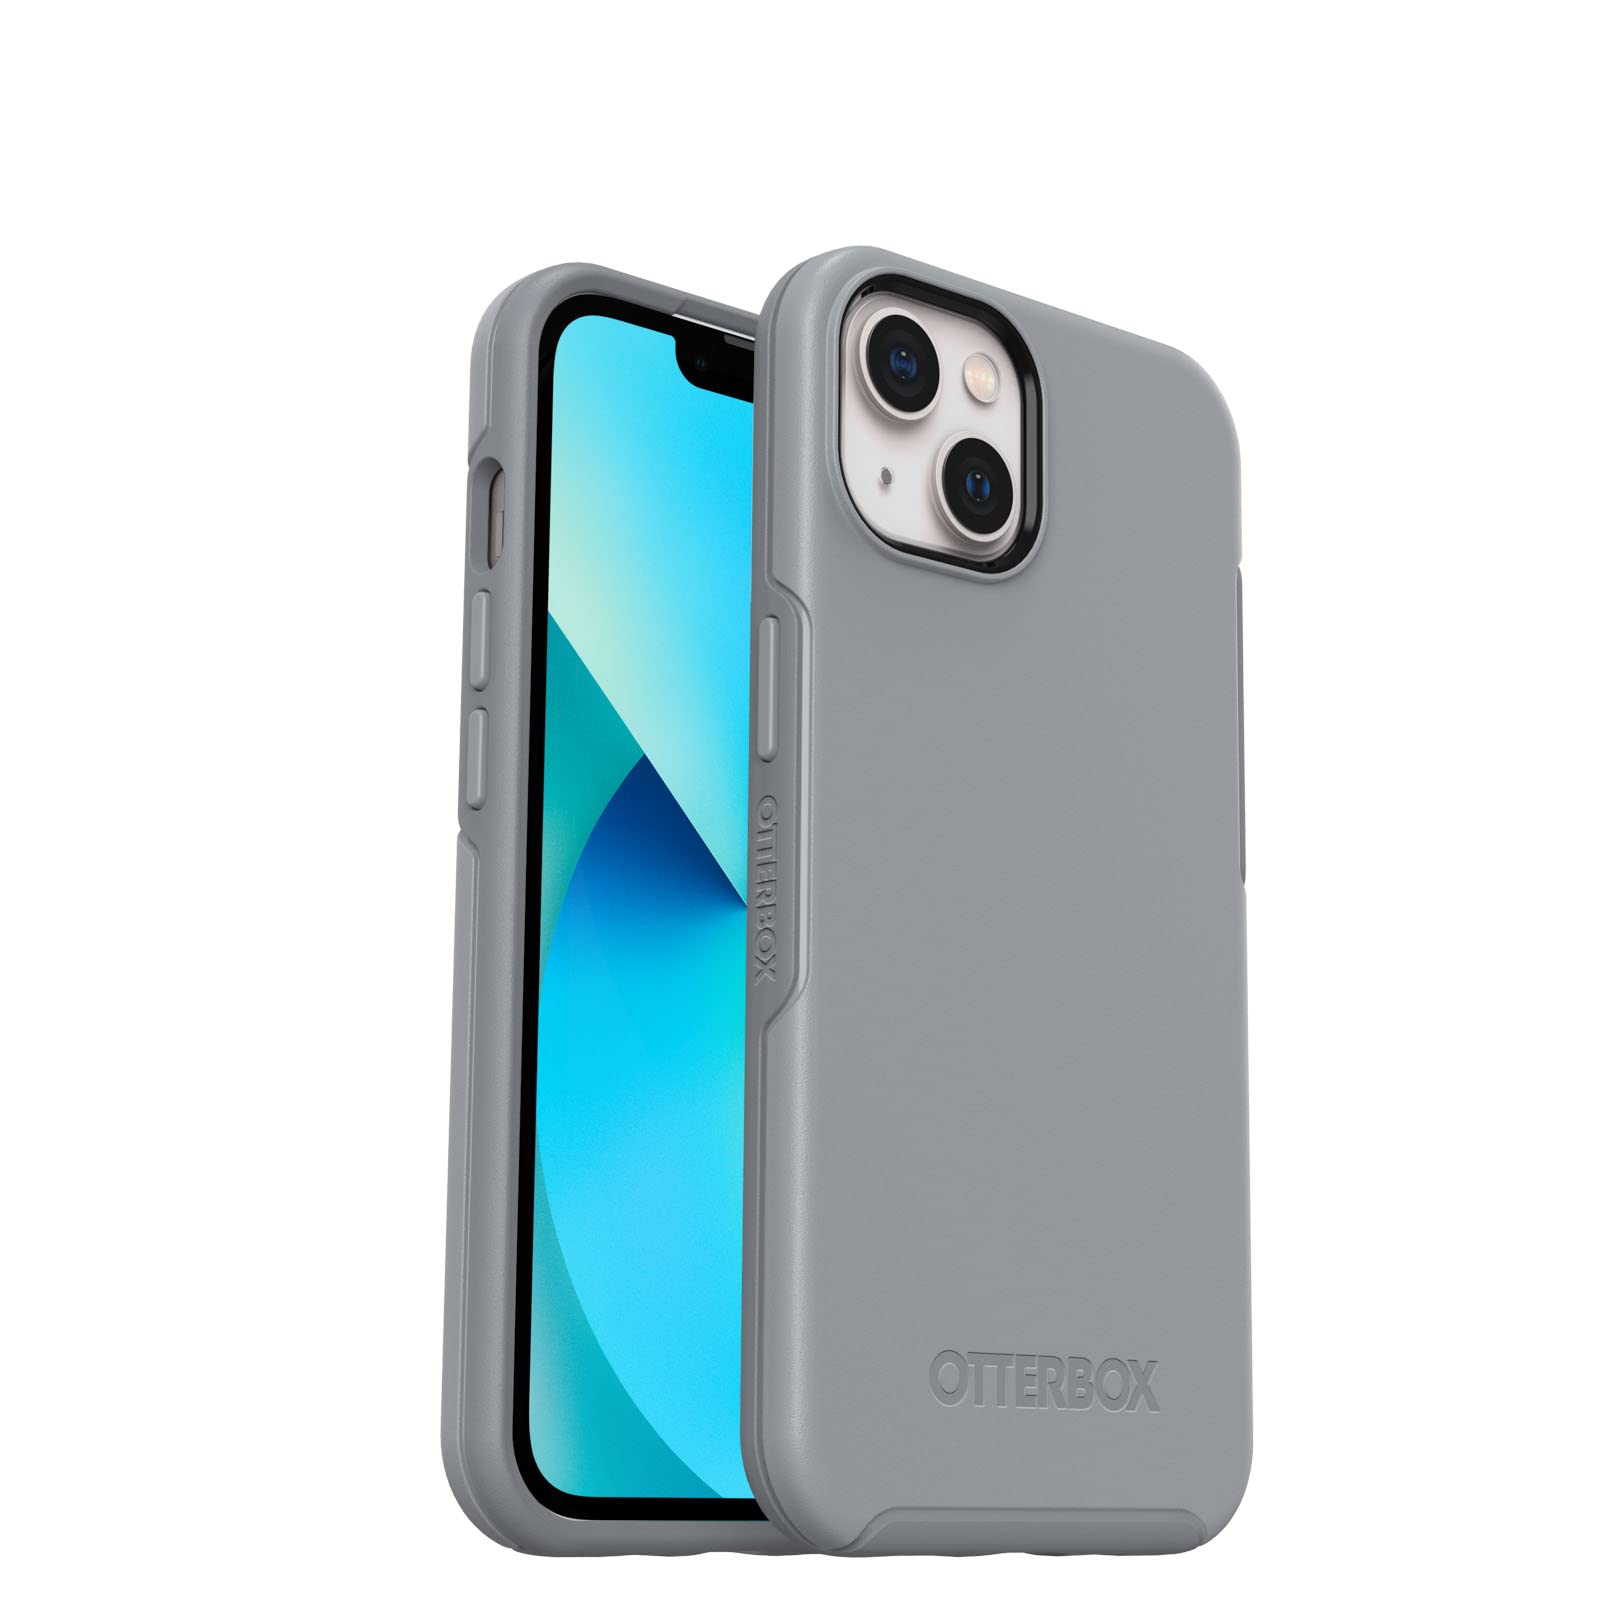 OTTERBOX SYMMETRY SERIES Case for iPhone 13 (ONLY) - RESILIENCE GREY